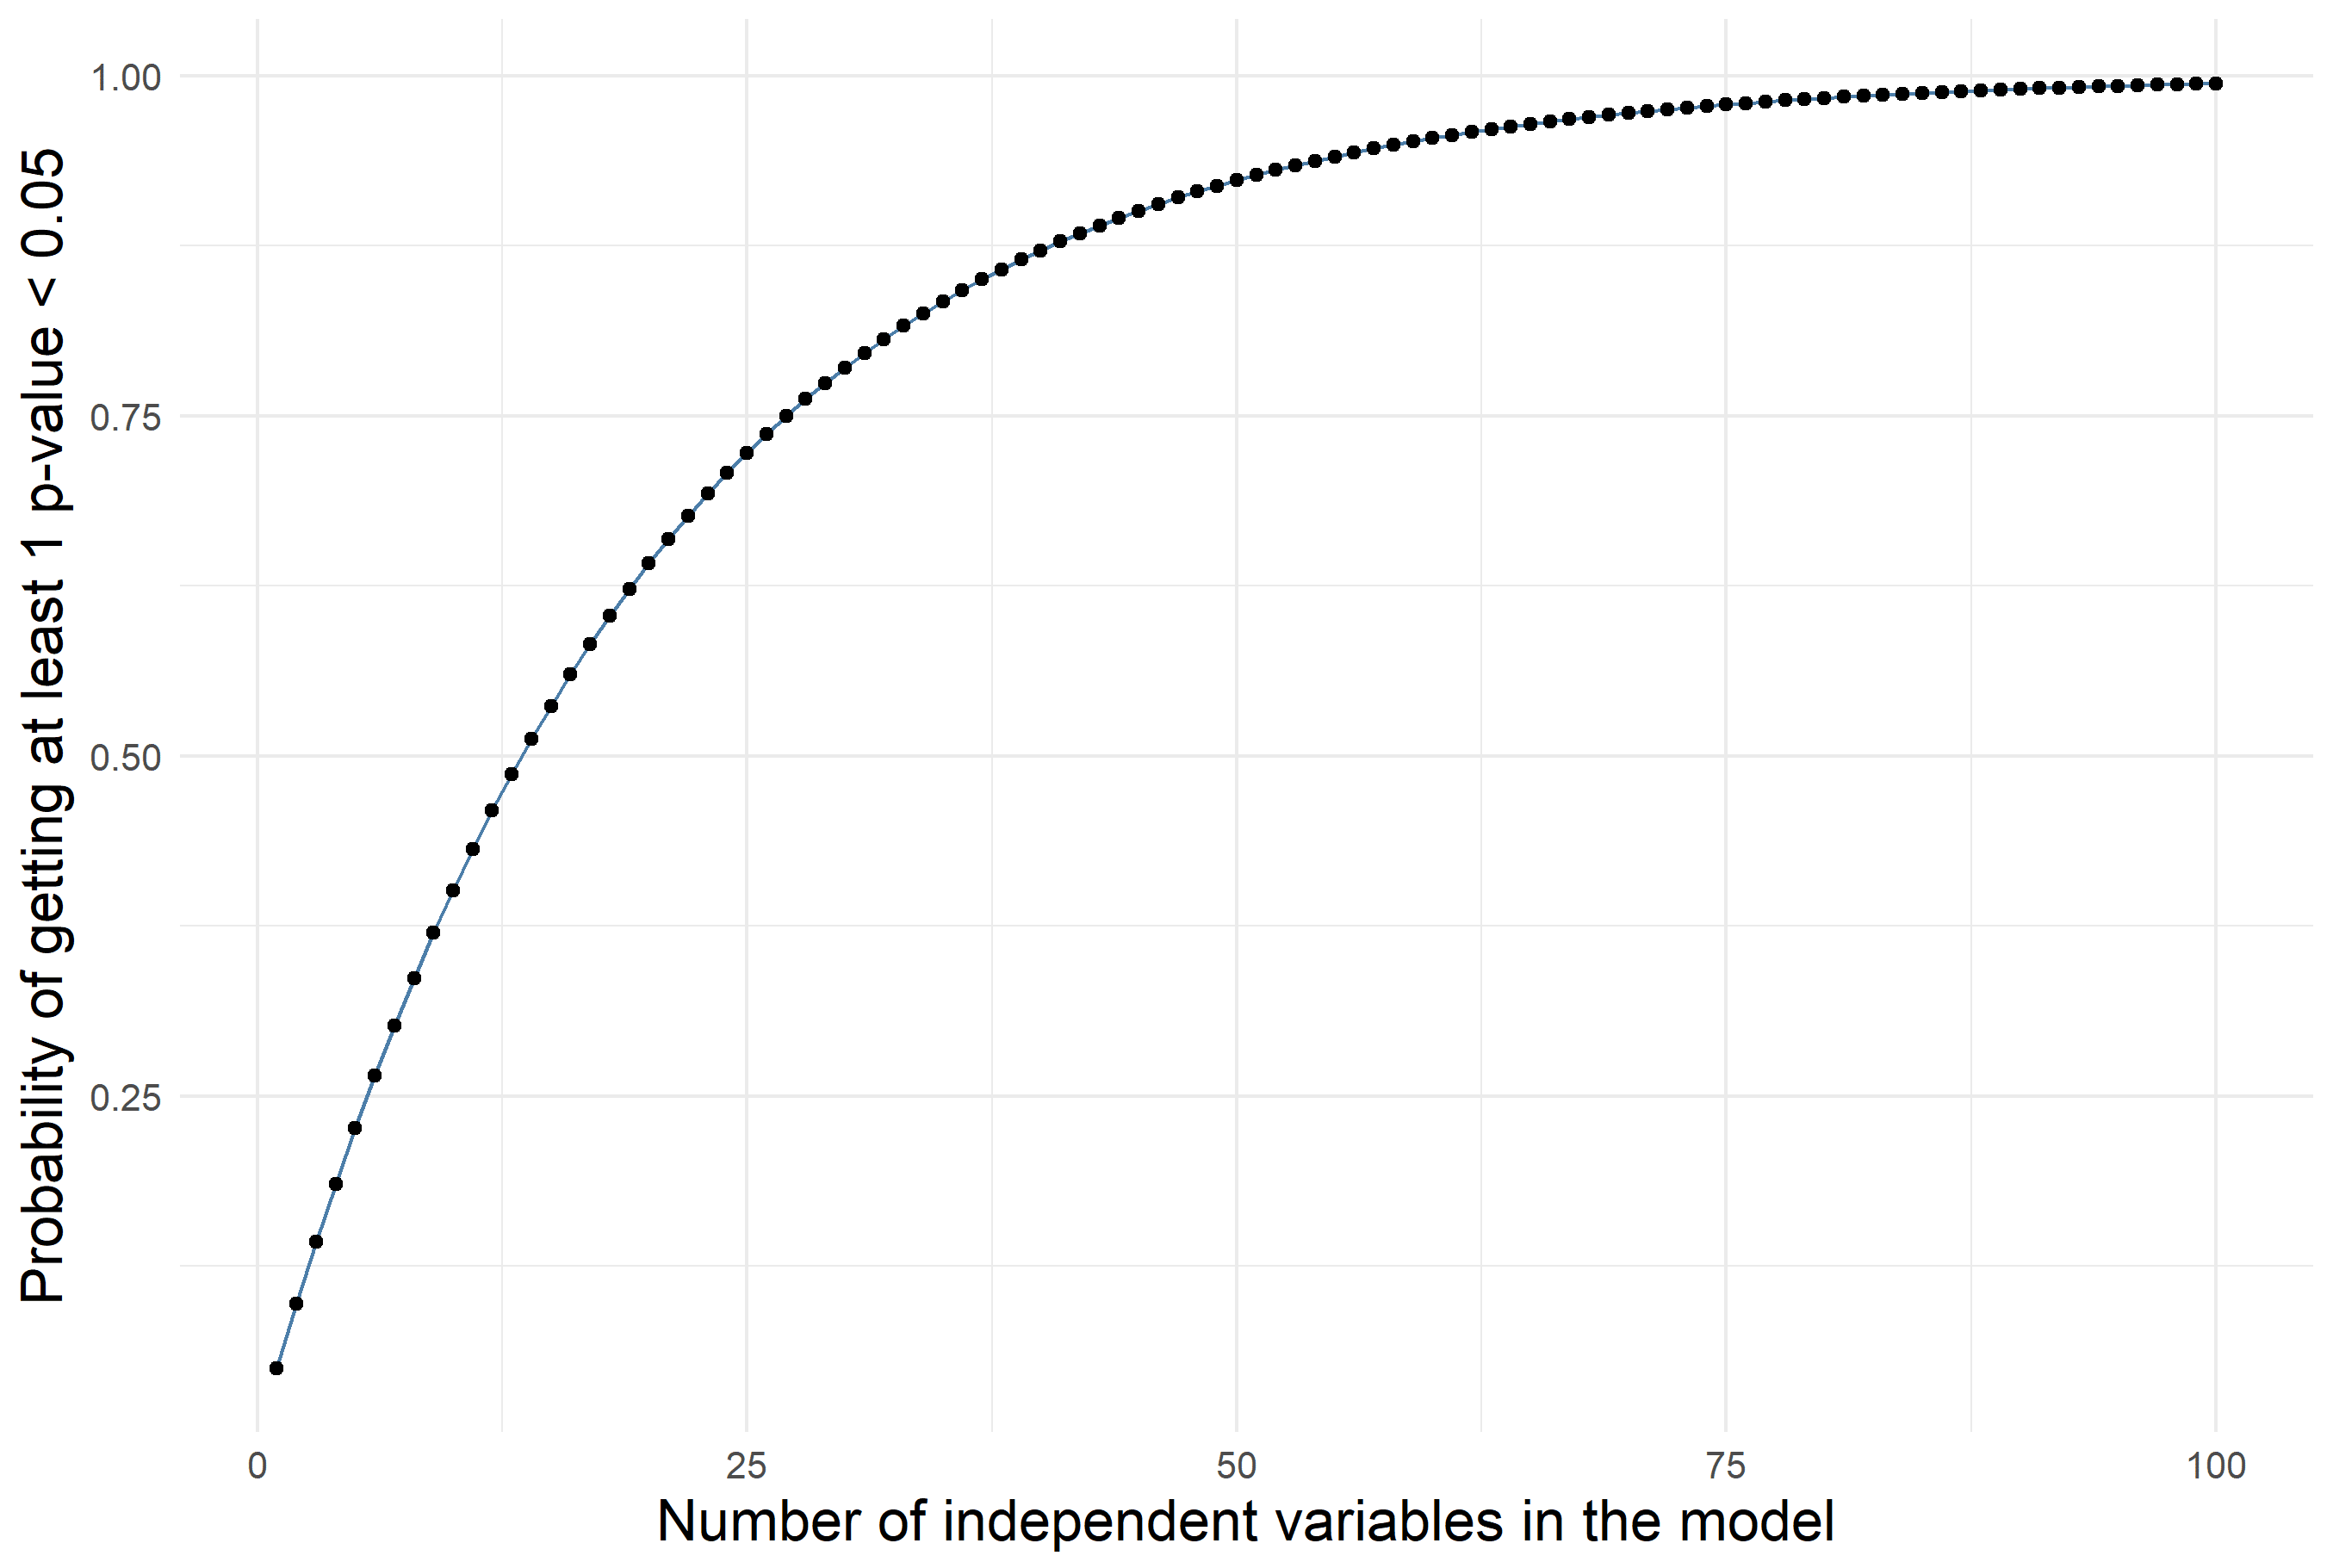 probability of getting at least 1 statistically significant result versus the number of variables in the model